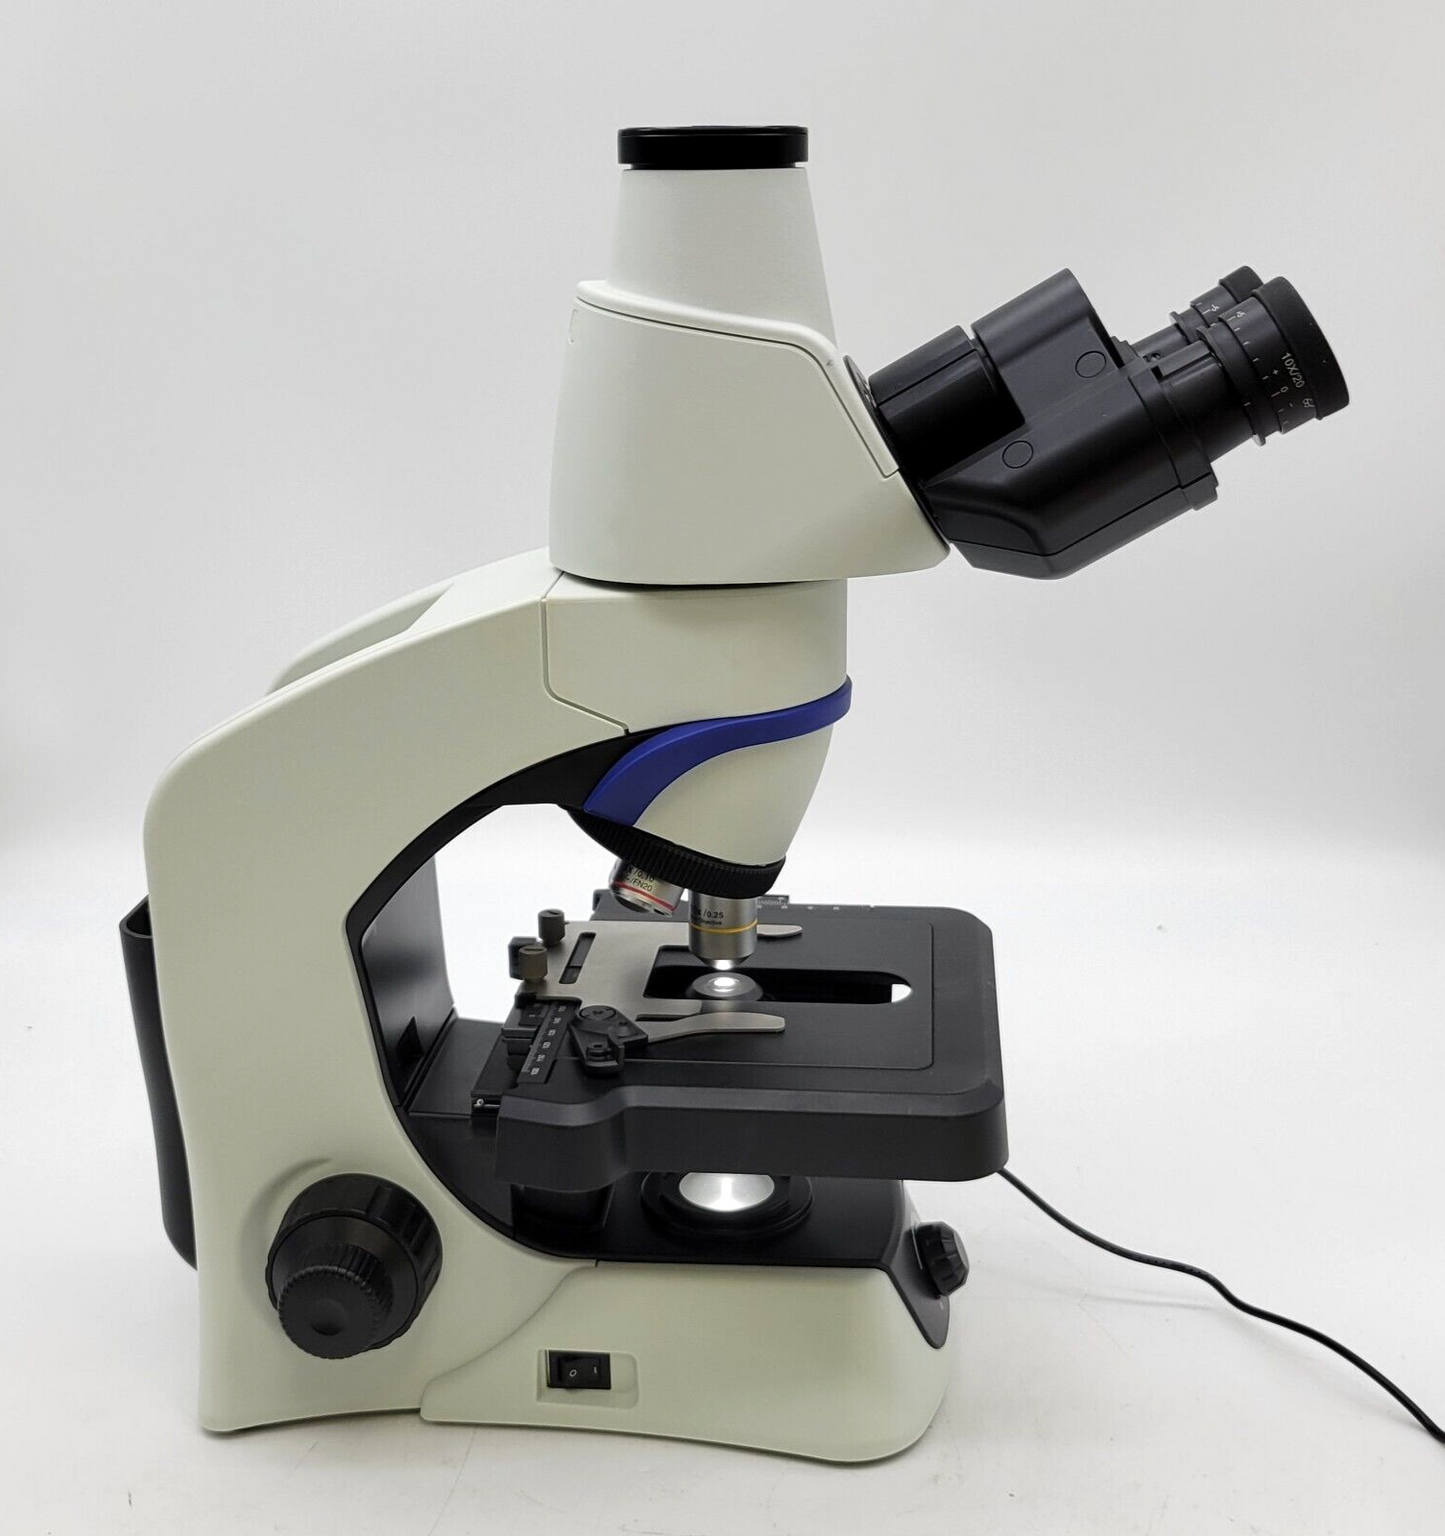 Olympus Microscope CX33 LED with 4x, 10x, 40x Objectives and Trinocular Head - microscopemarketplace